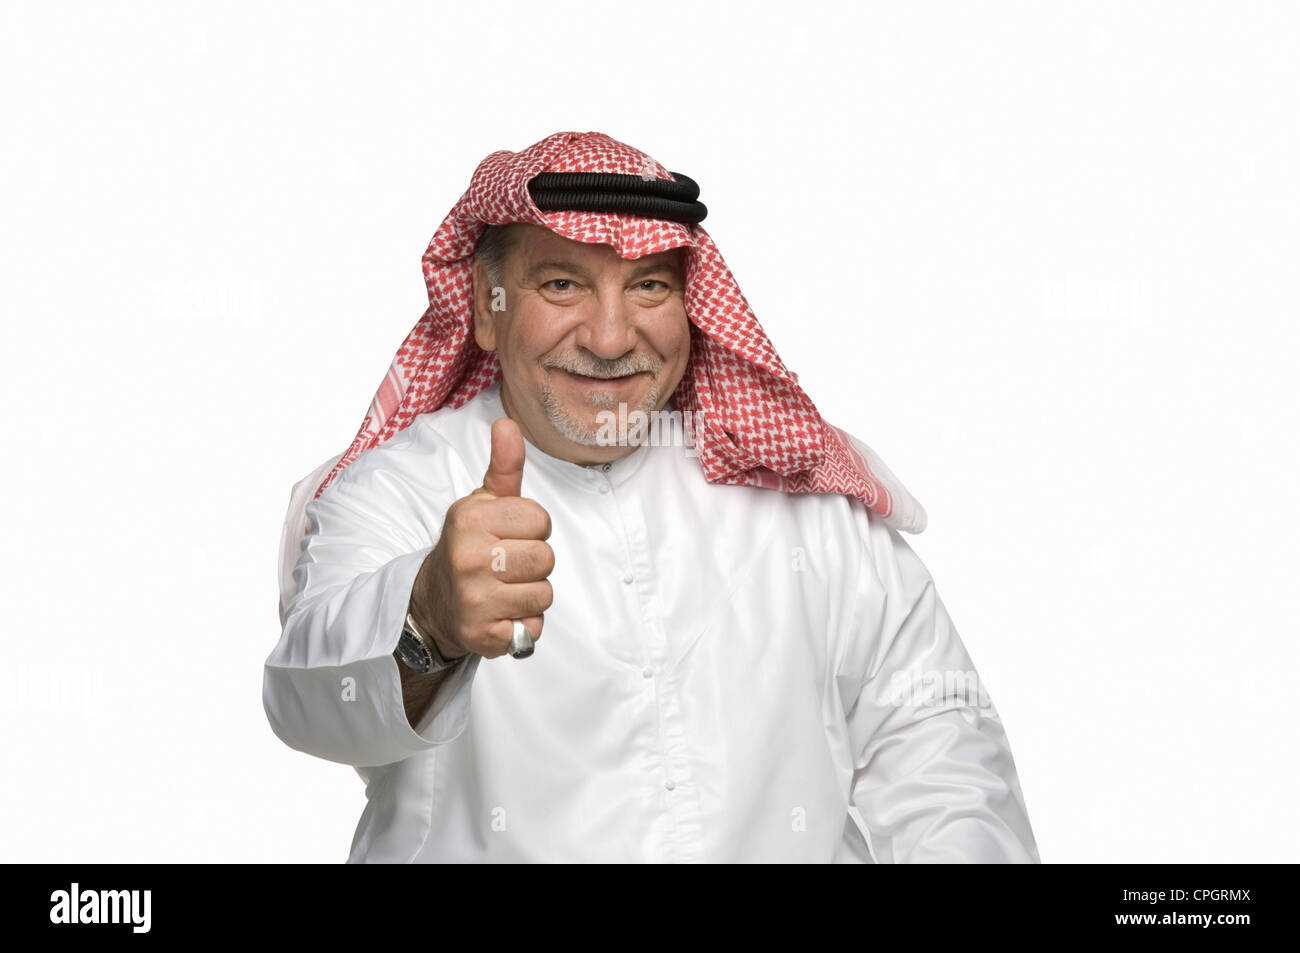 Mature man showing thumbs up, smiling, portrait Stock Photo